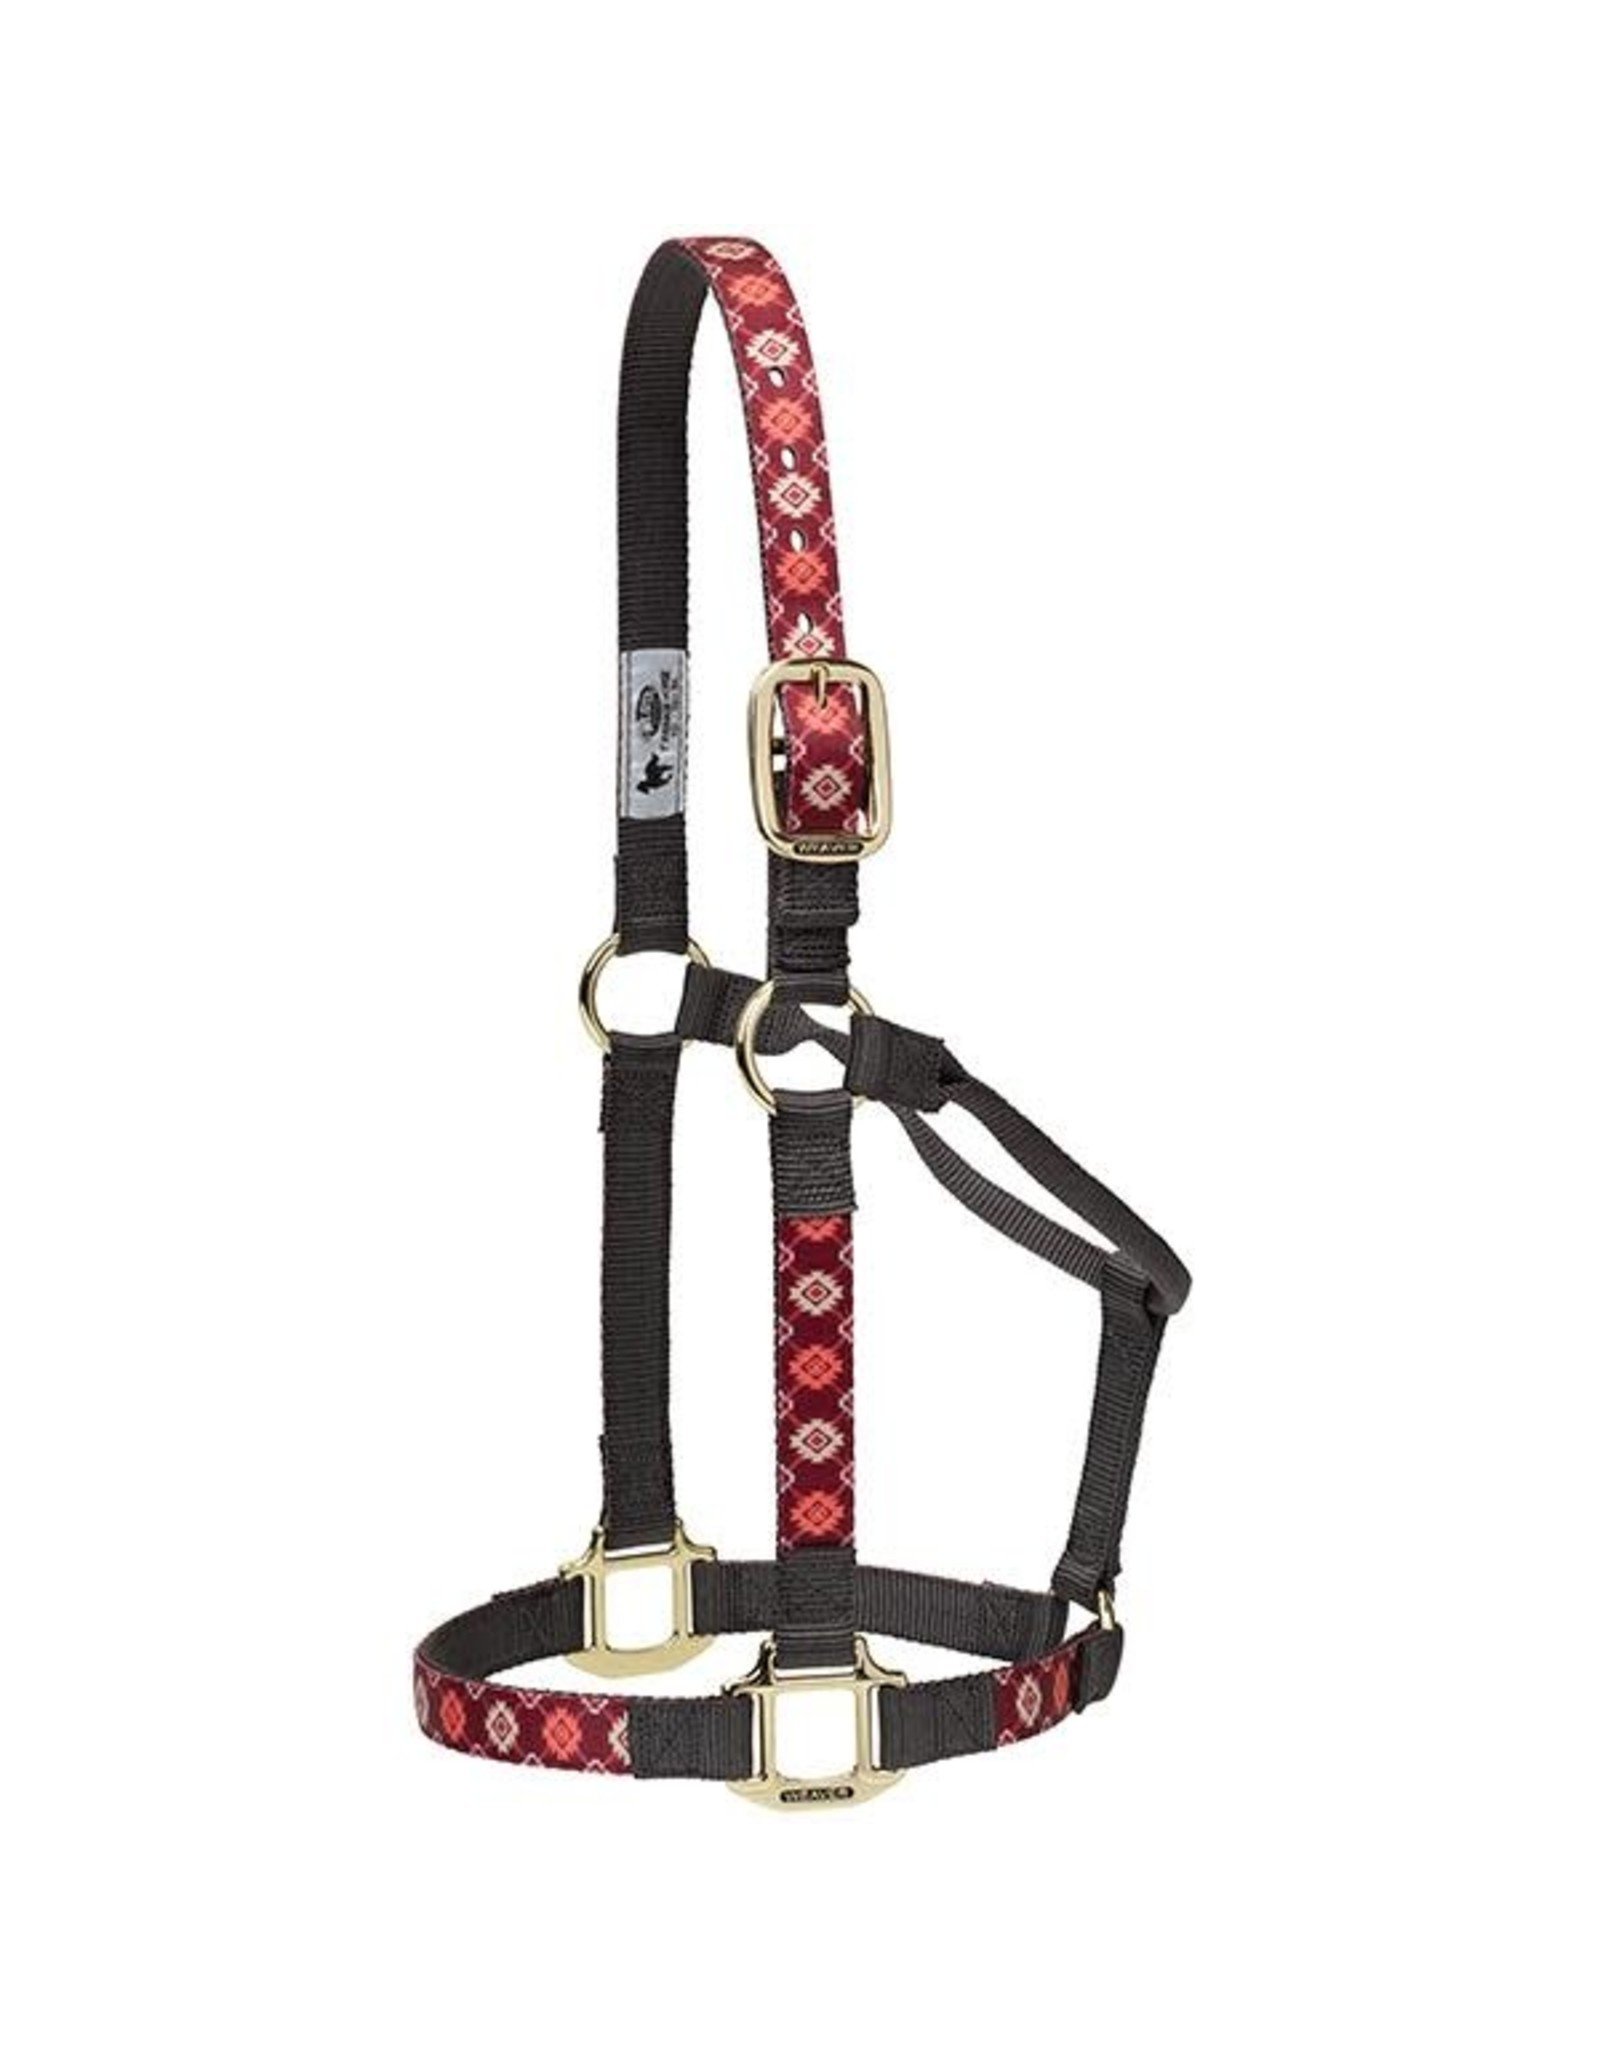 Weaver Leather Patterned Non-Adjustable Halters